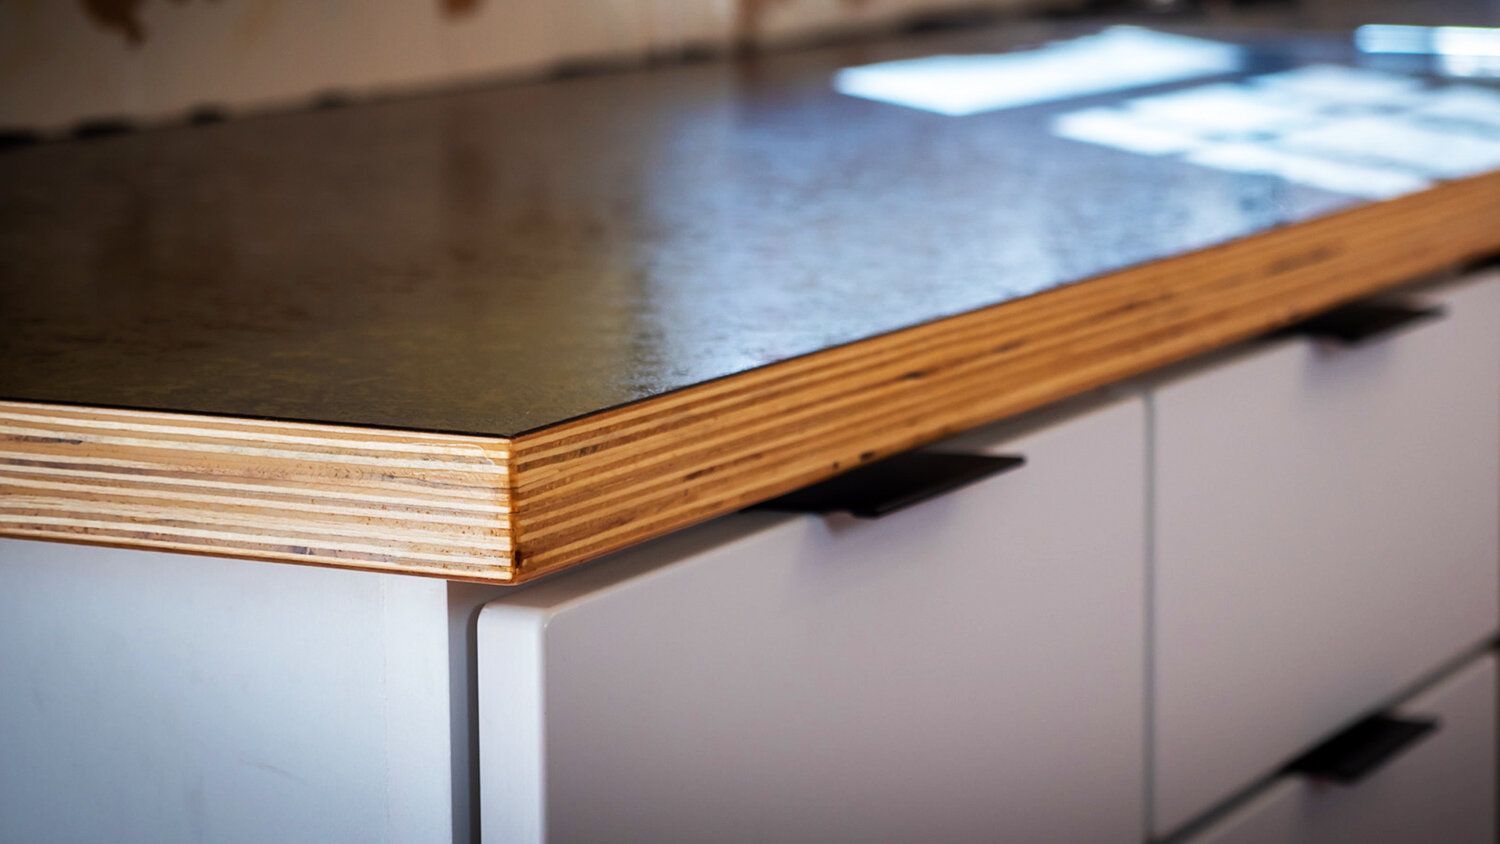 How To Build and Install Butcher Block Countertops // Home Bar Pt